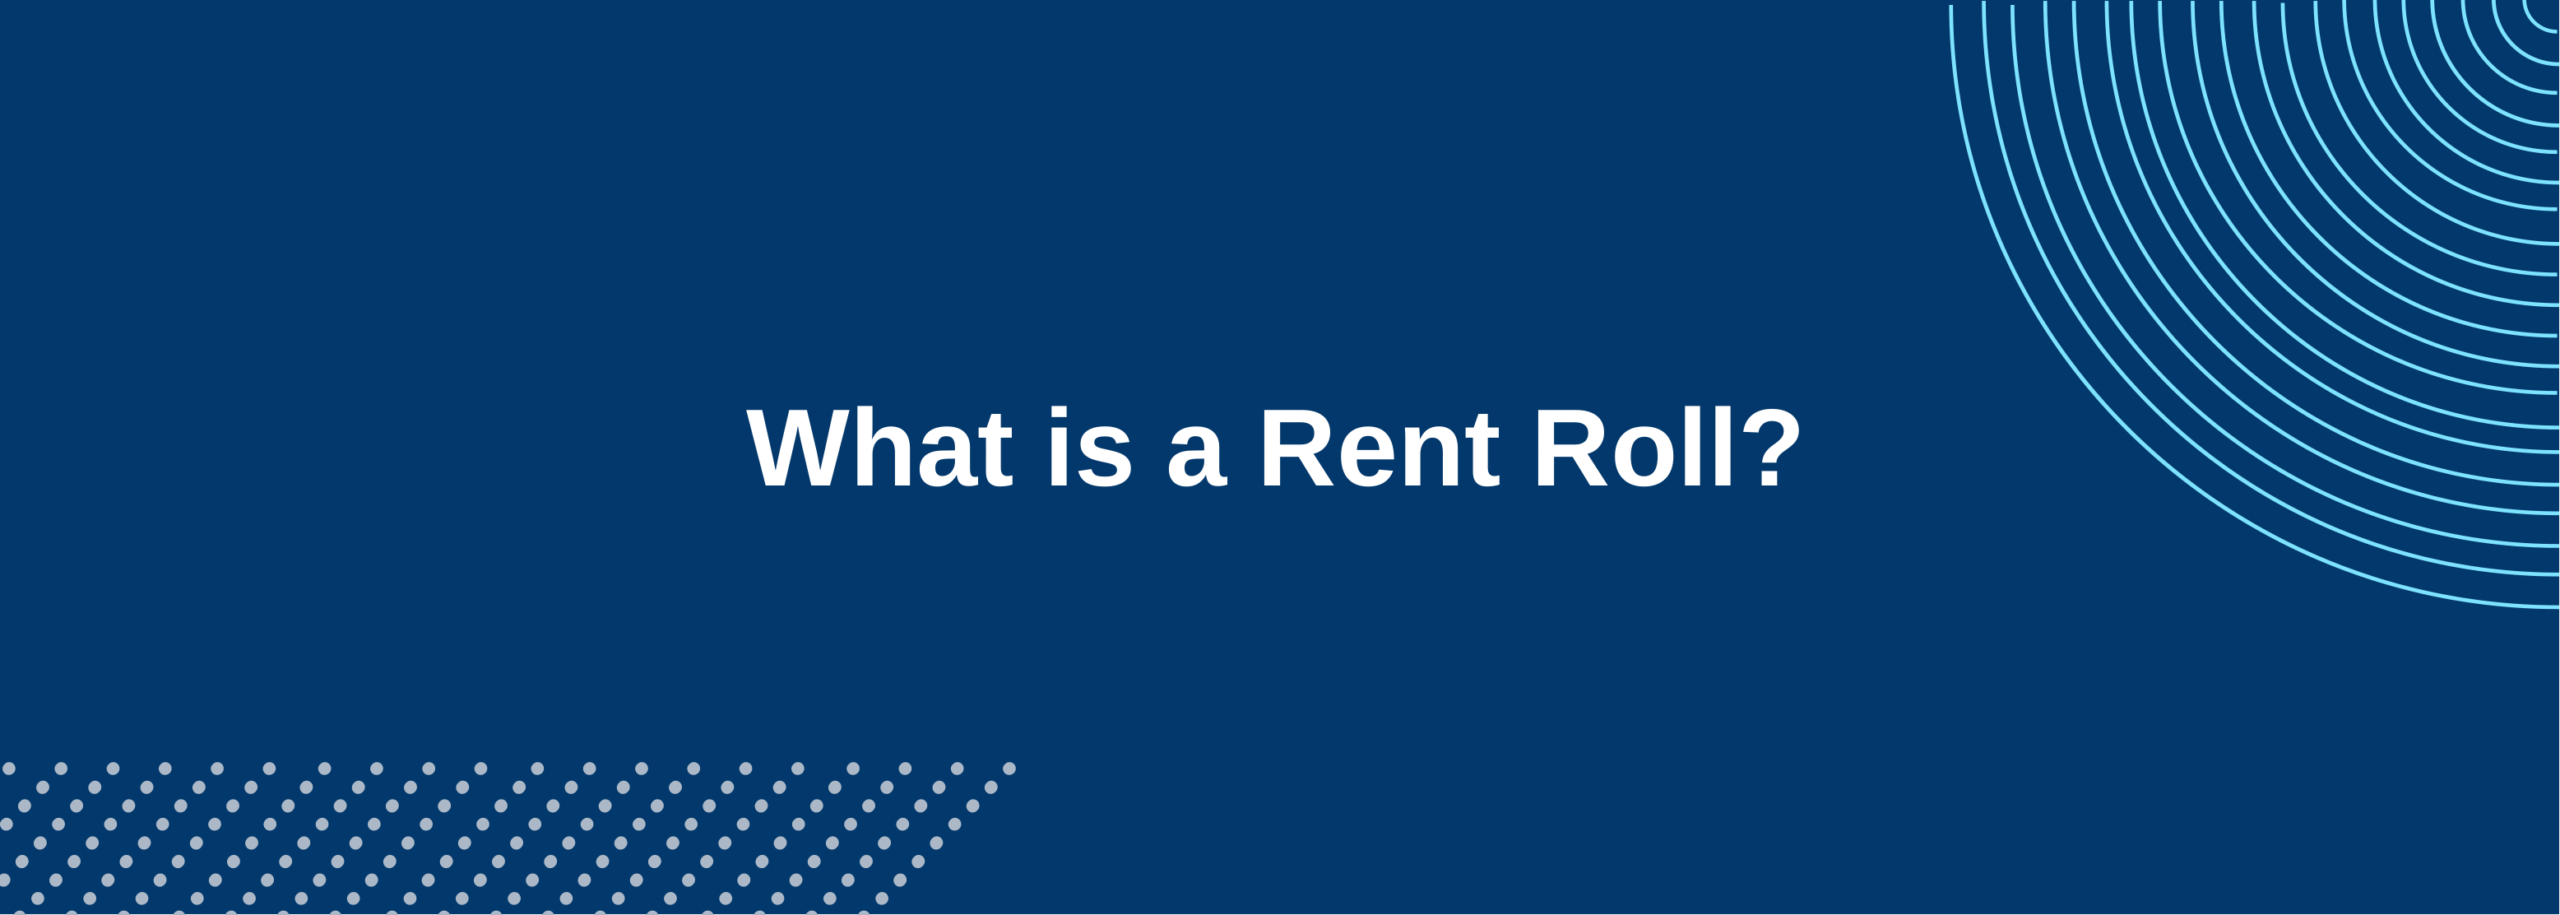 A rent roll is a document that lists due rent and rents that have been collected on an investment property.